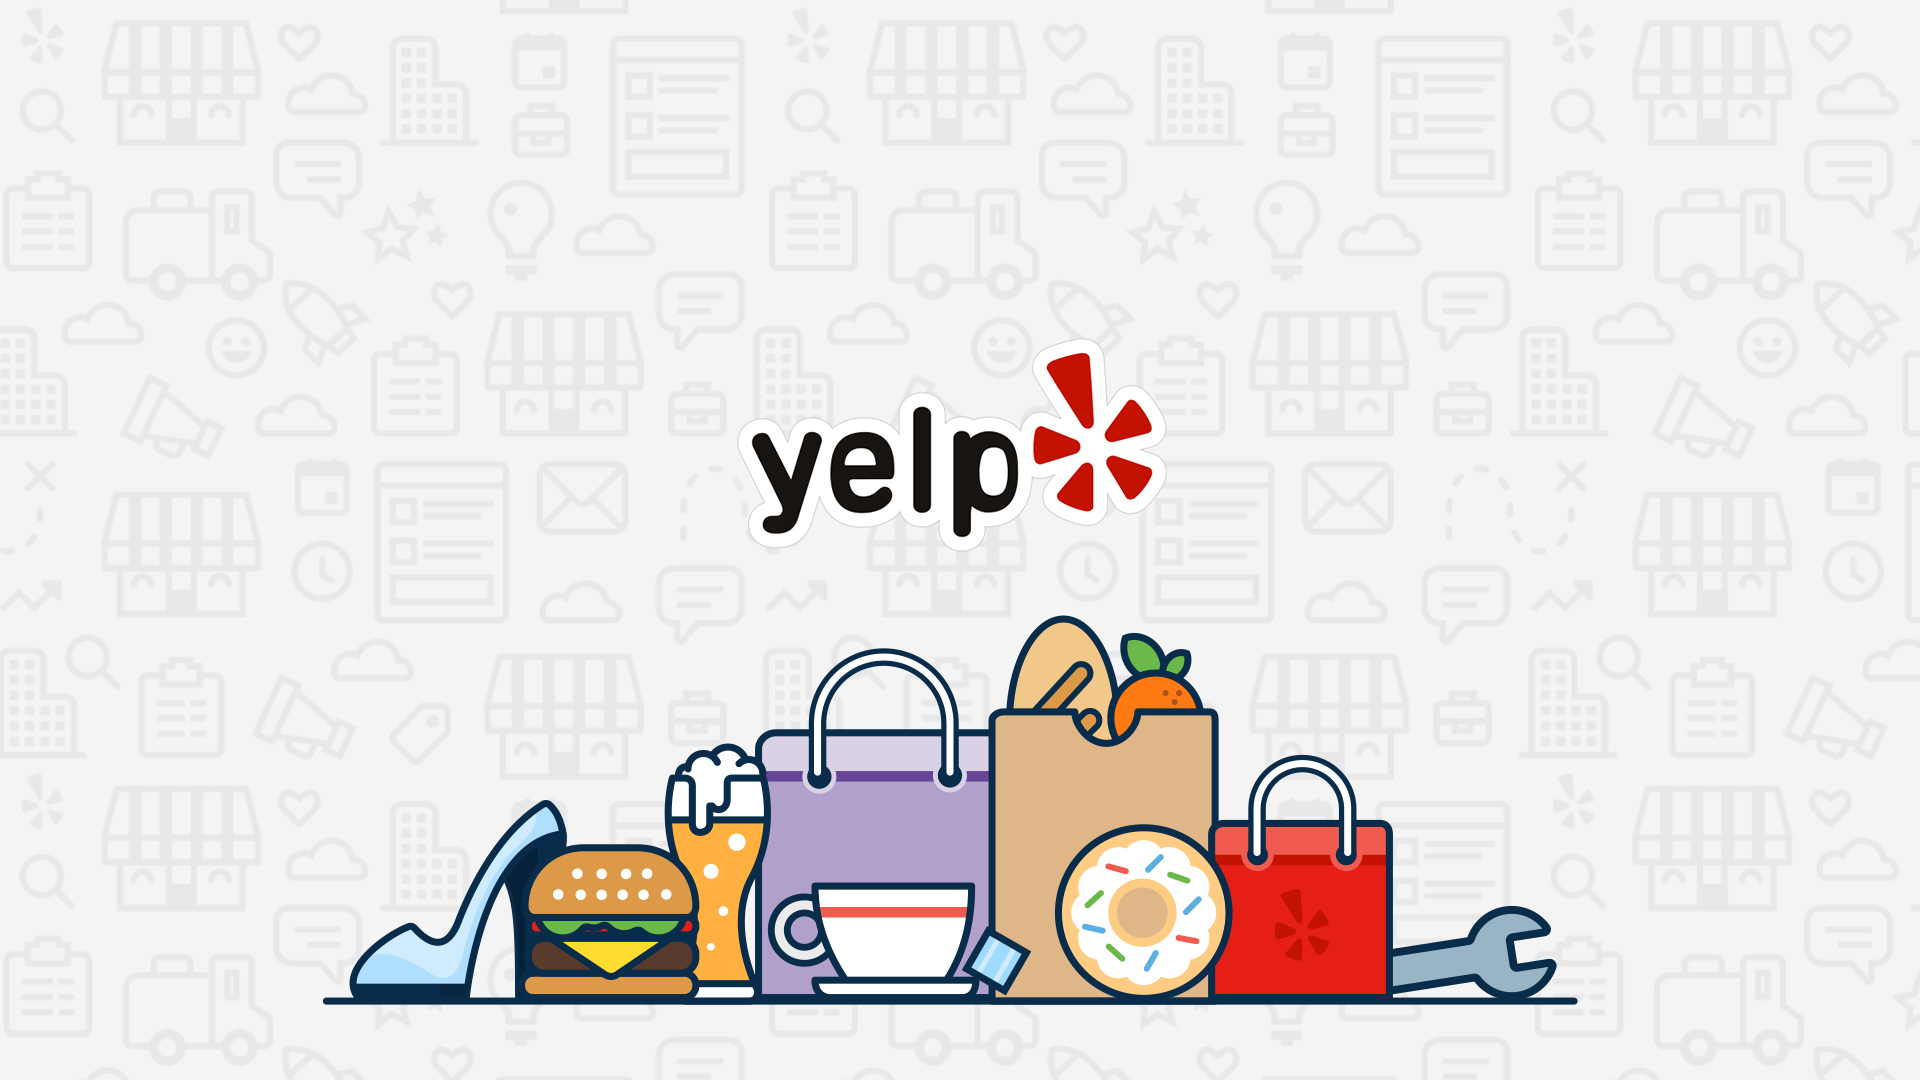 What impact has Yelp had on your business?